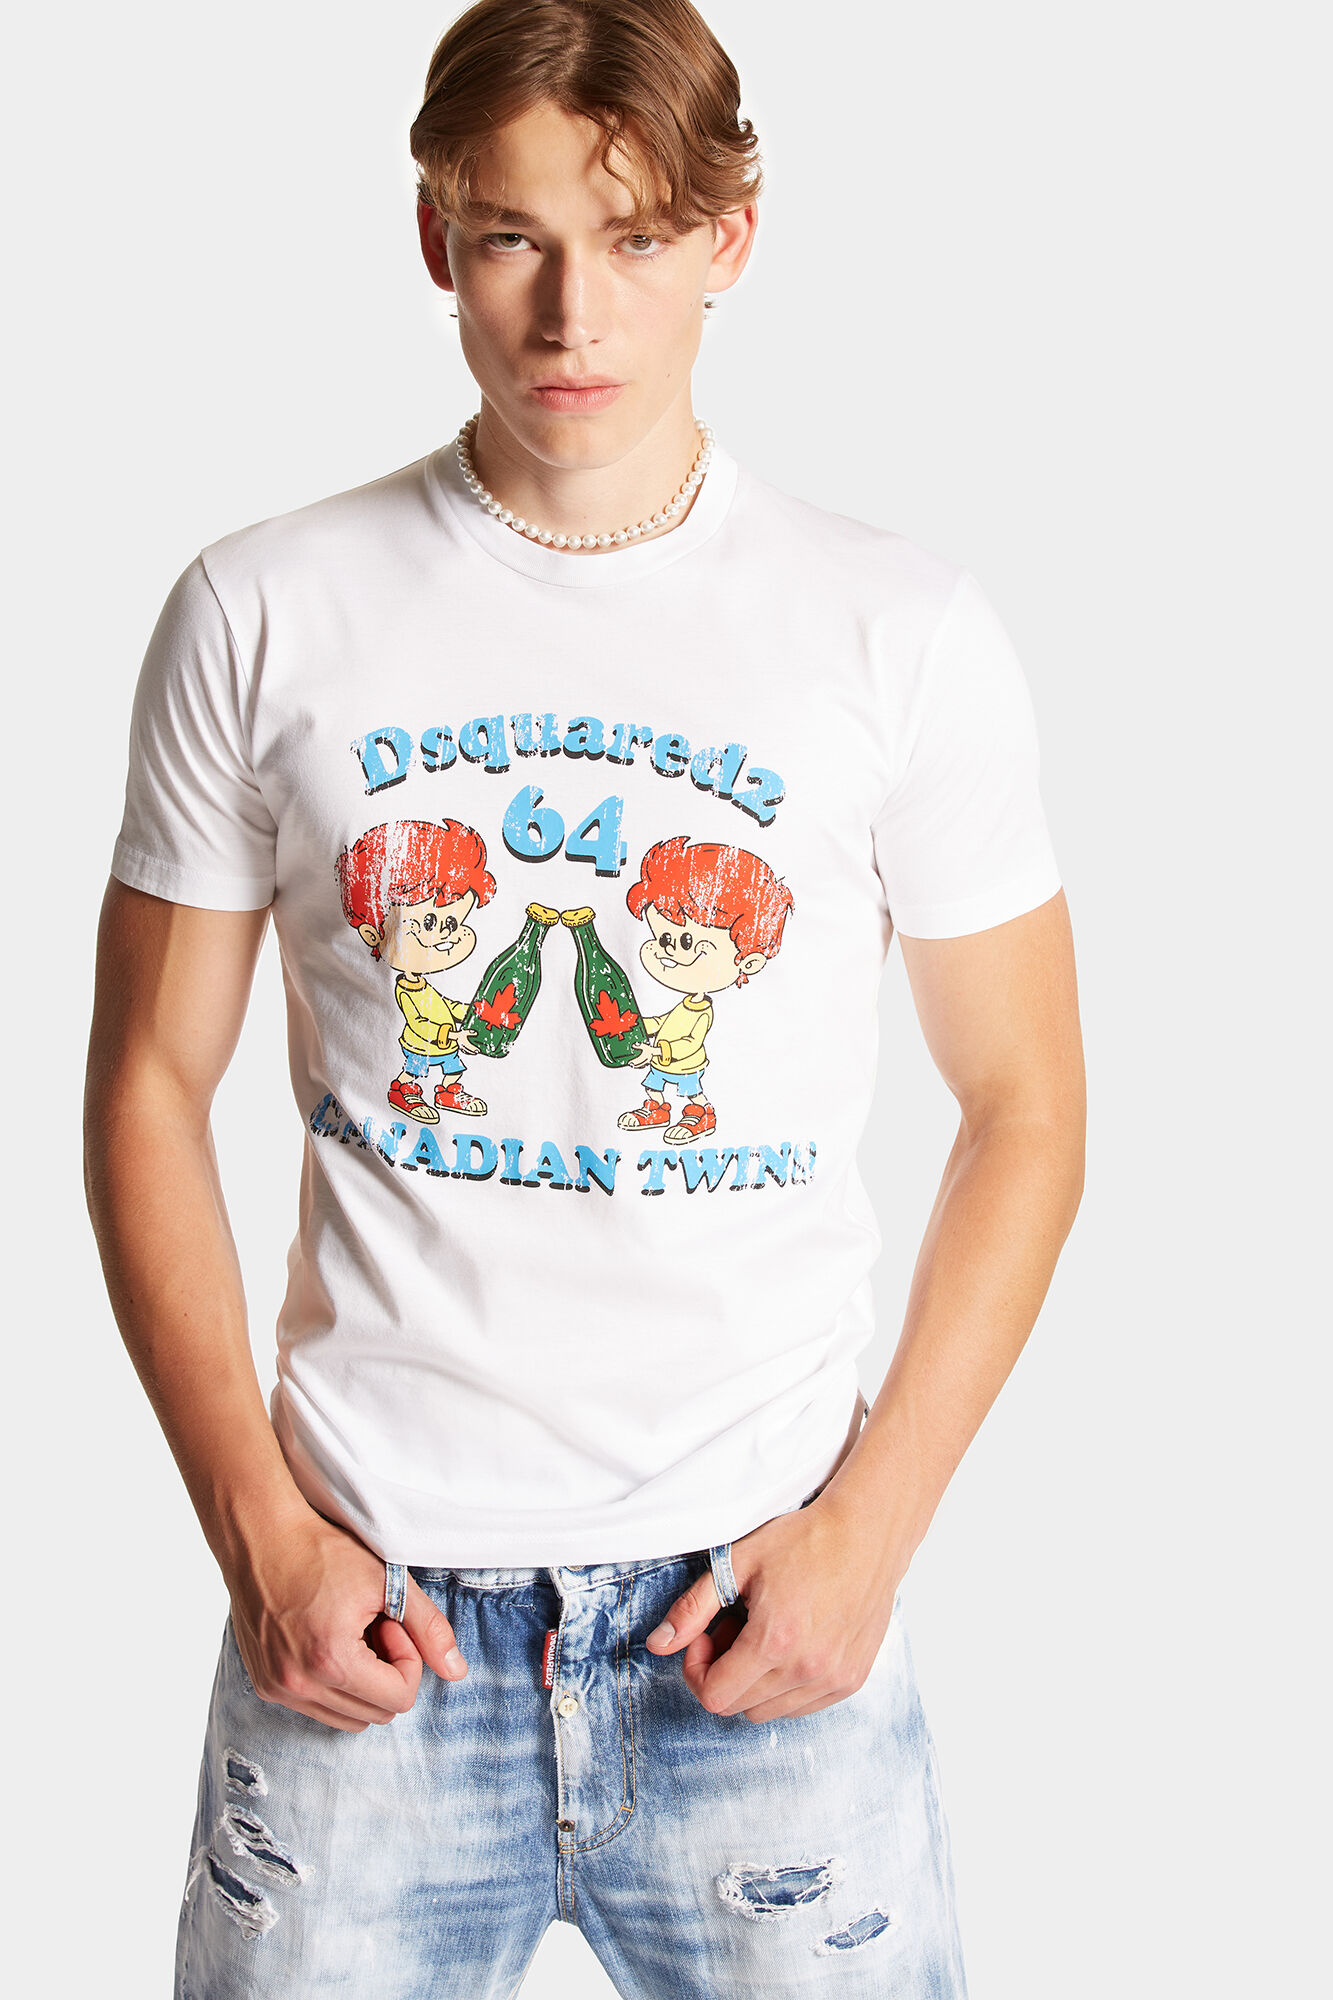 Men's T-Shirts and Tops | DSQUARED2